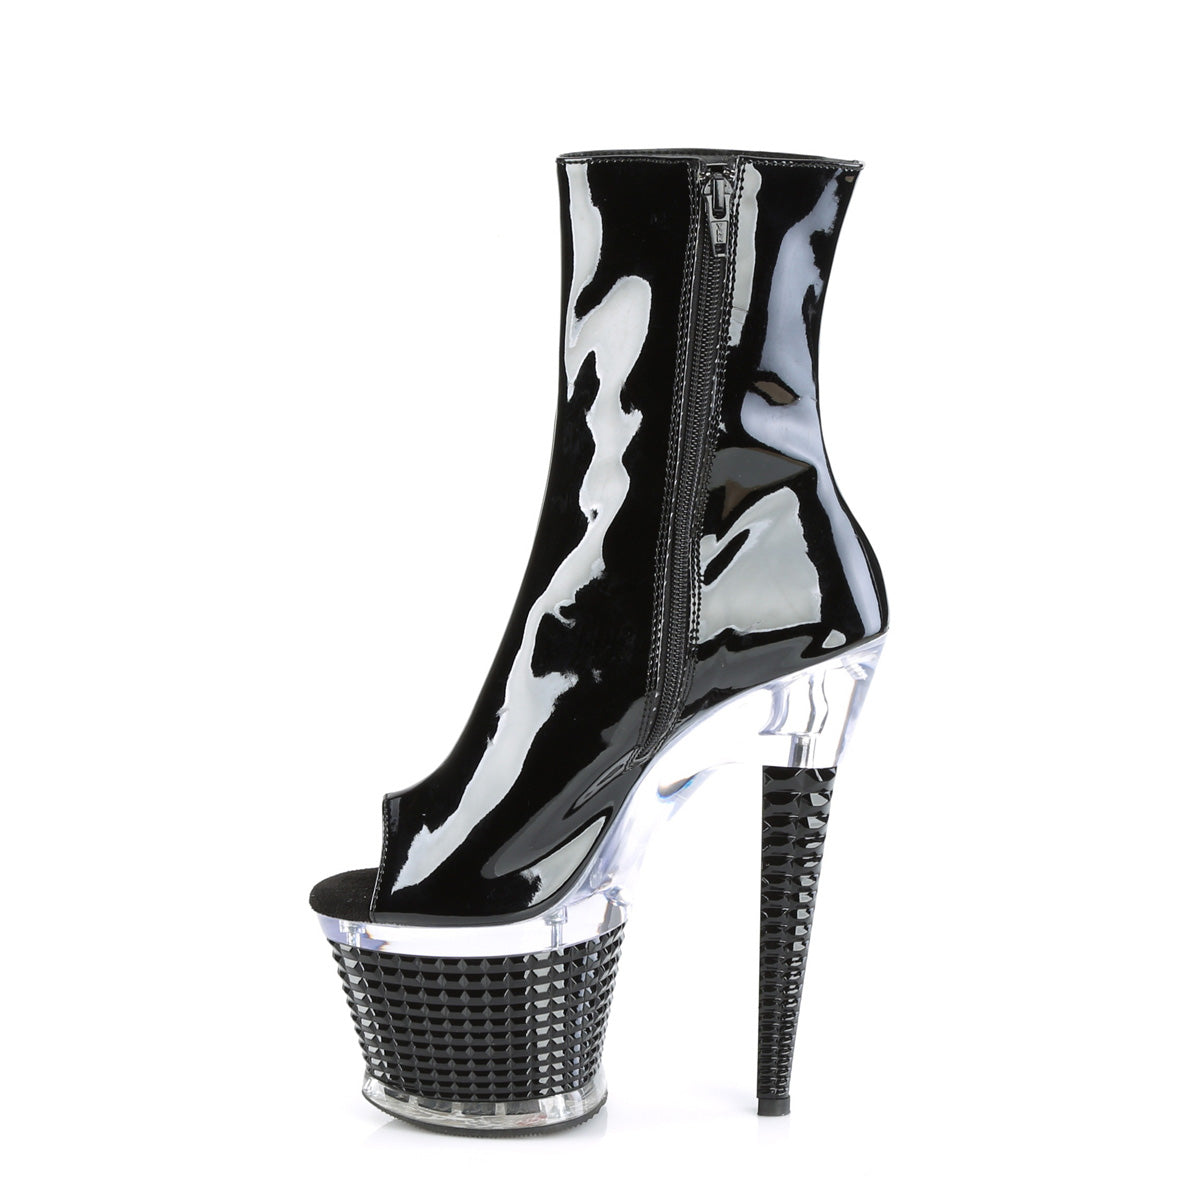 Black and Silver Platform Ankle Boots